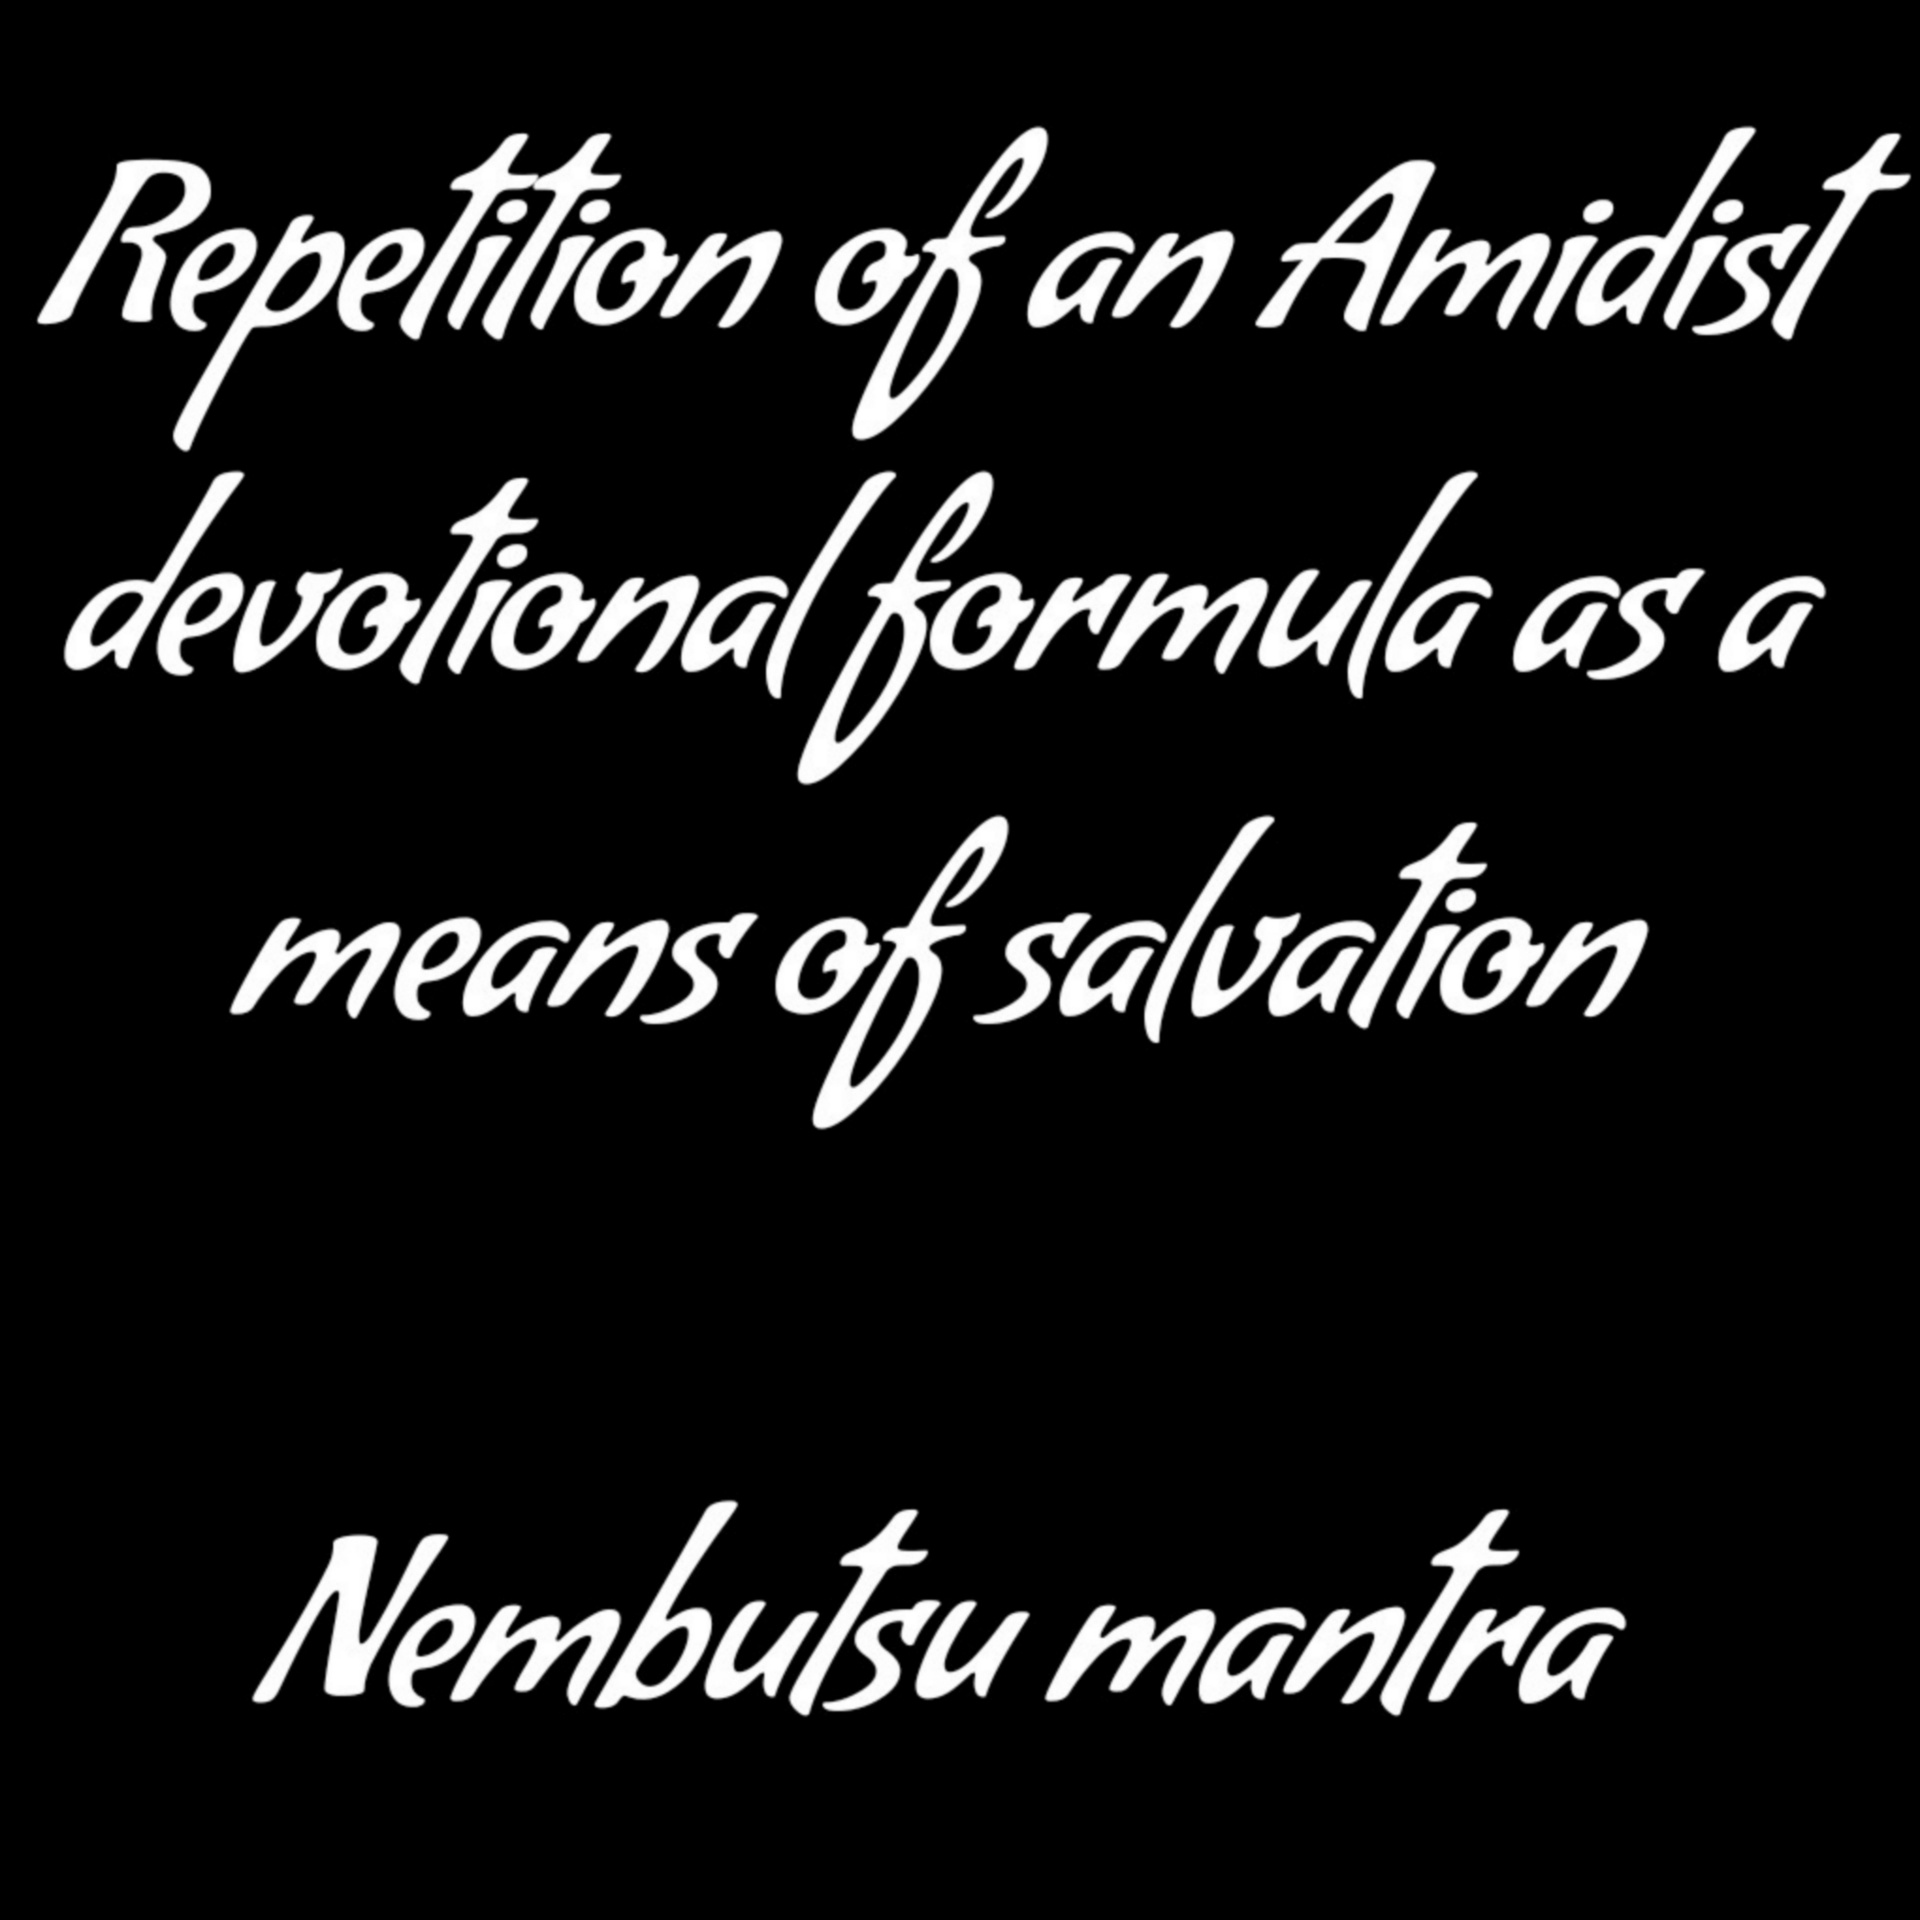 repetition of an Amidist devotional formula as a means of salvation